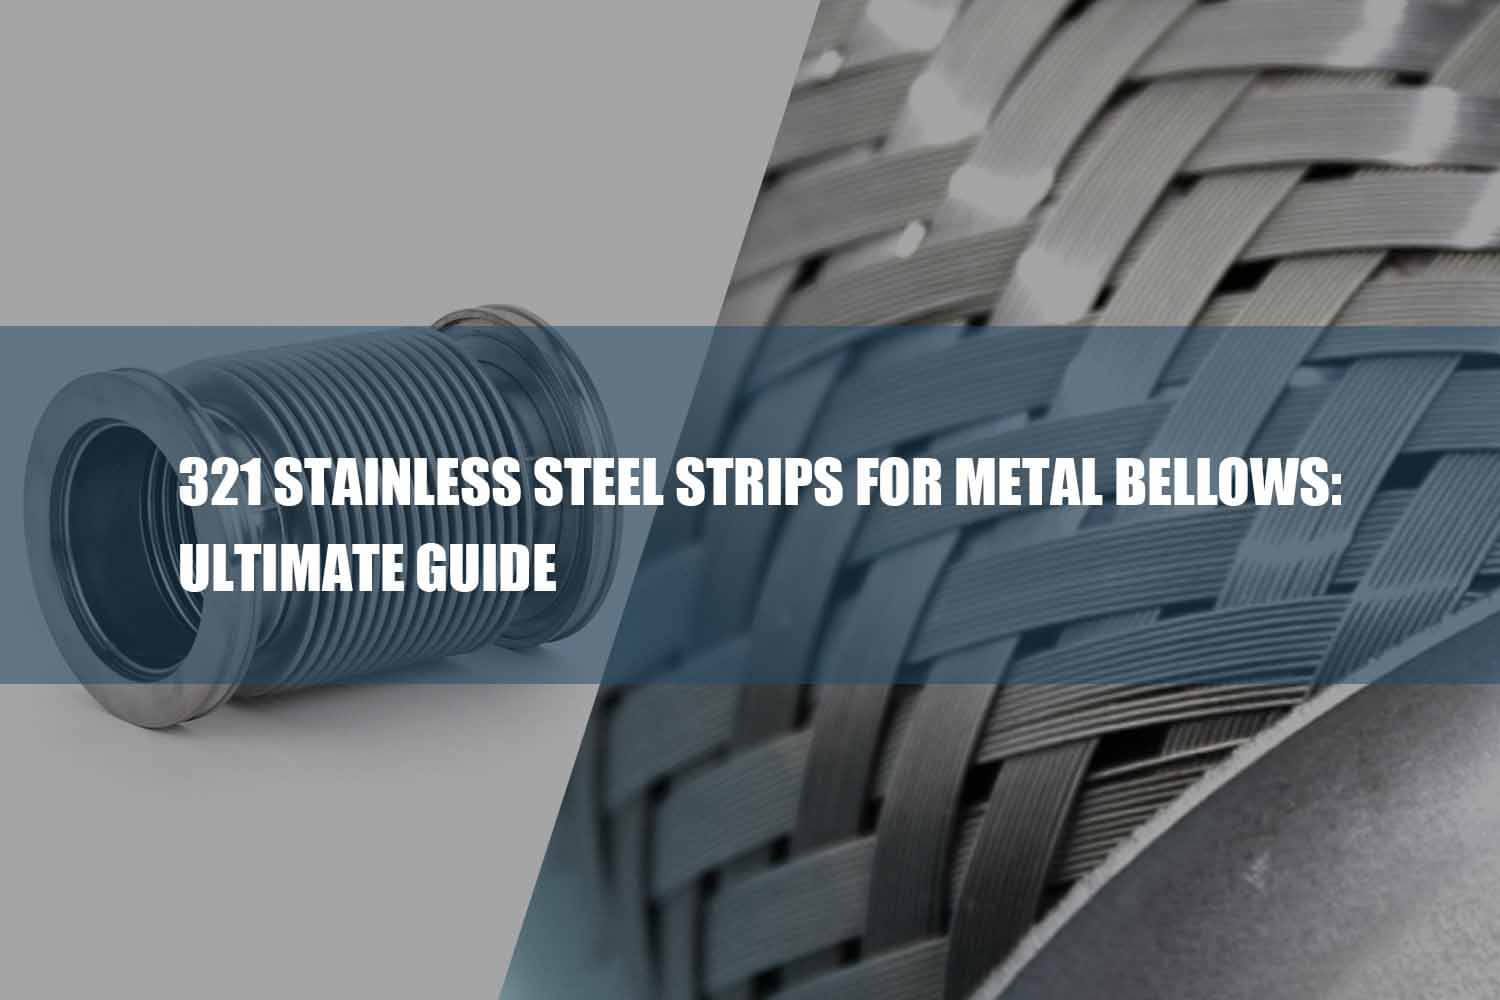 321 stainless steel strips for metal bellows guide